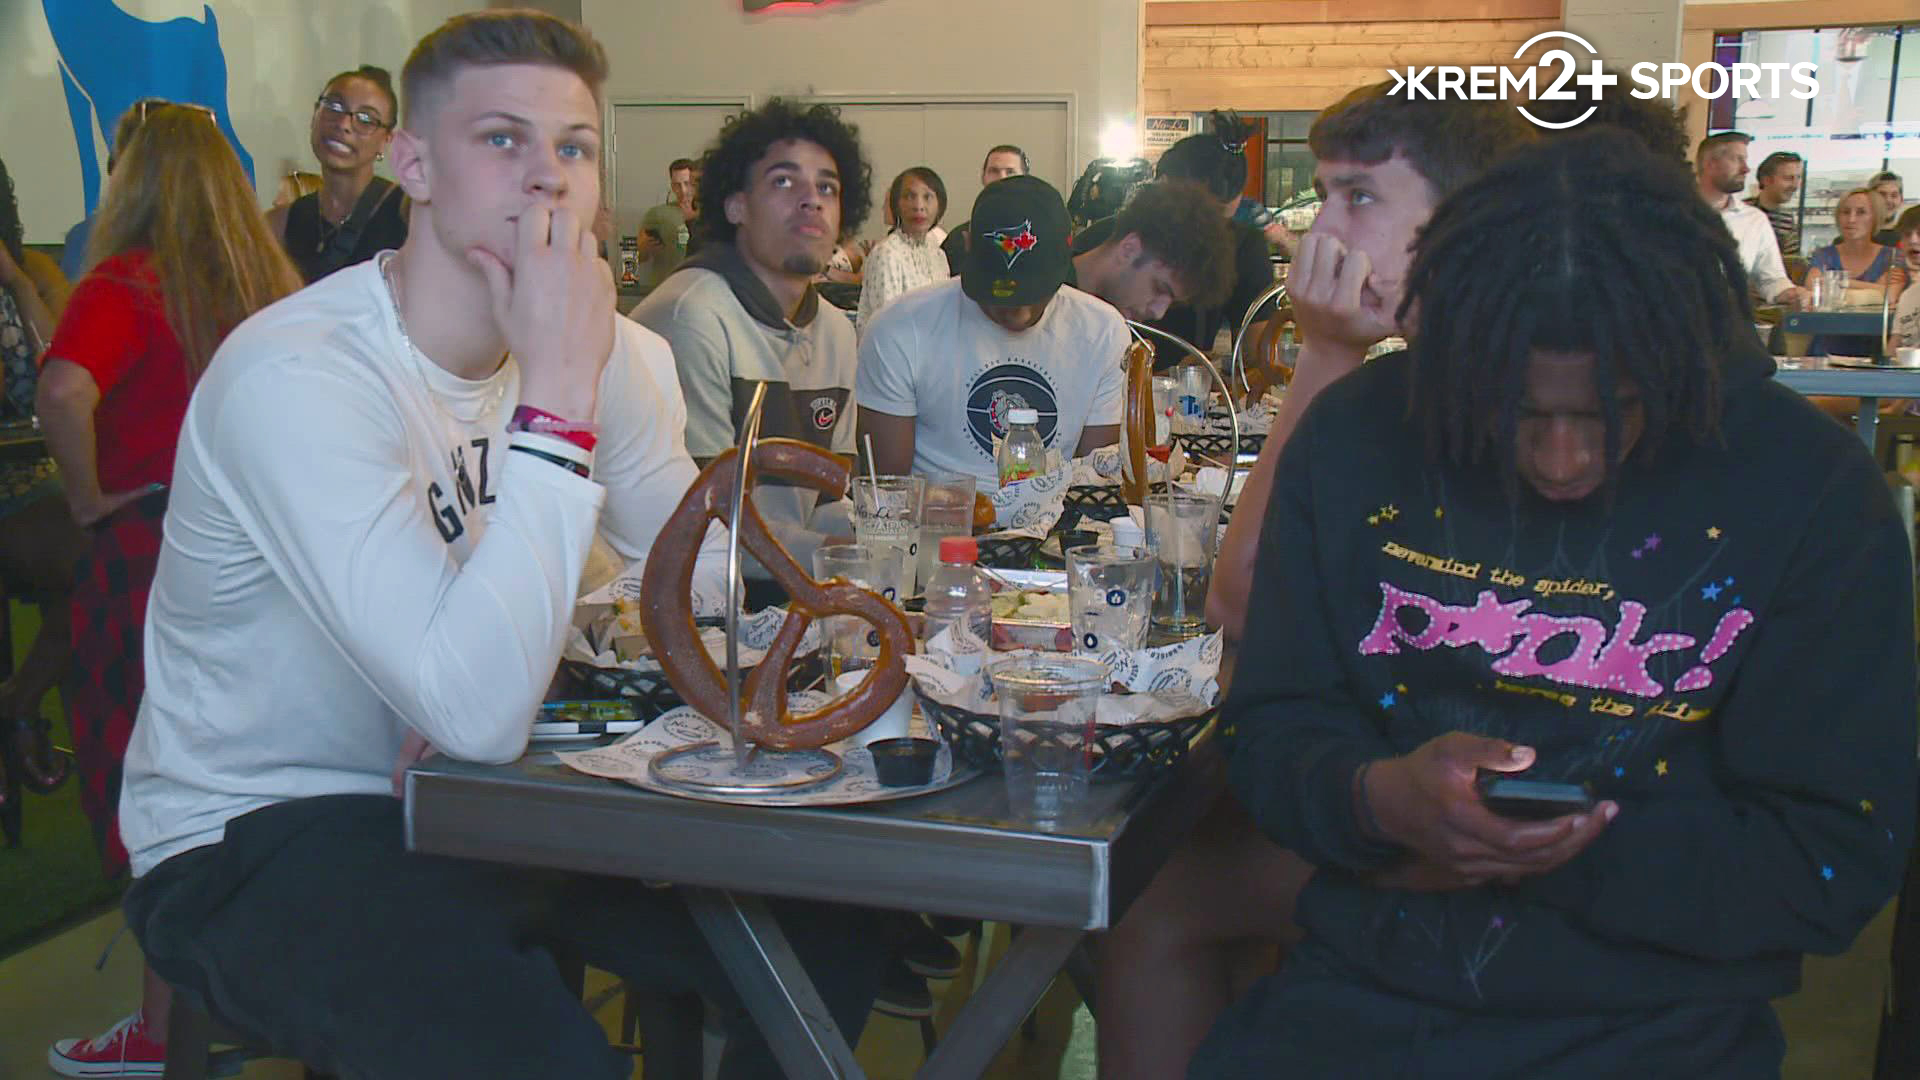 The Gonzaga basketball team gathered together at No-Li Brewhouse for an NBA Draft watch party to see their former teammates' dreams come true.